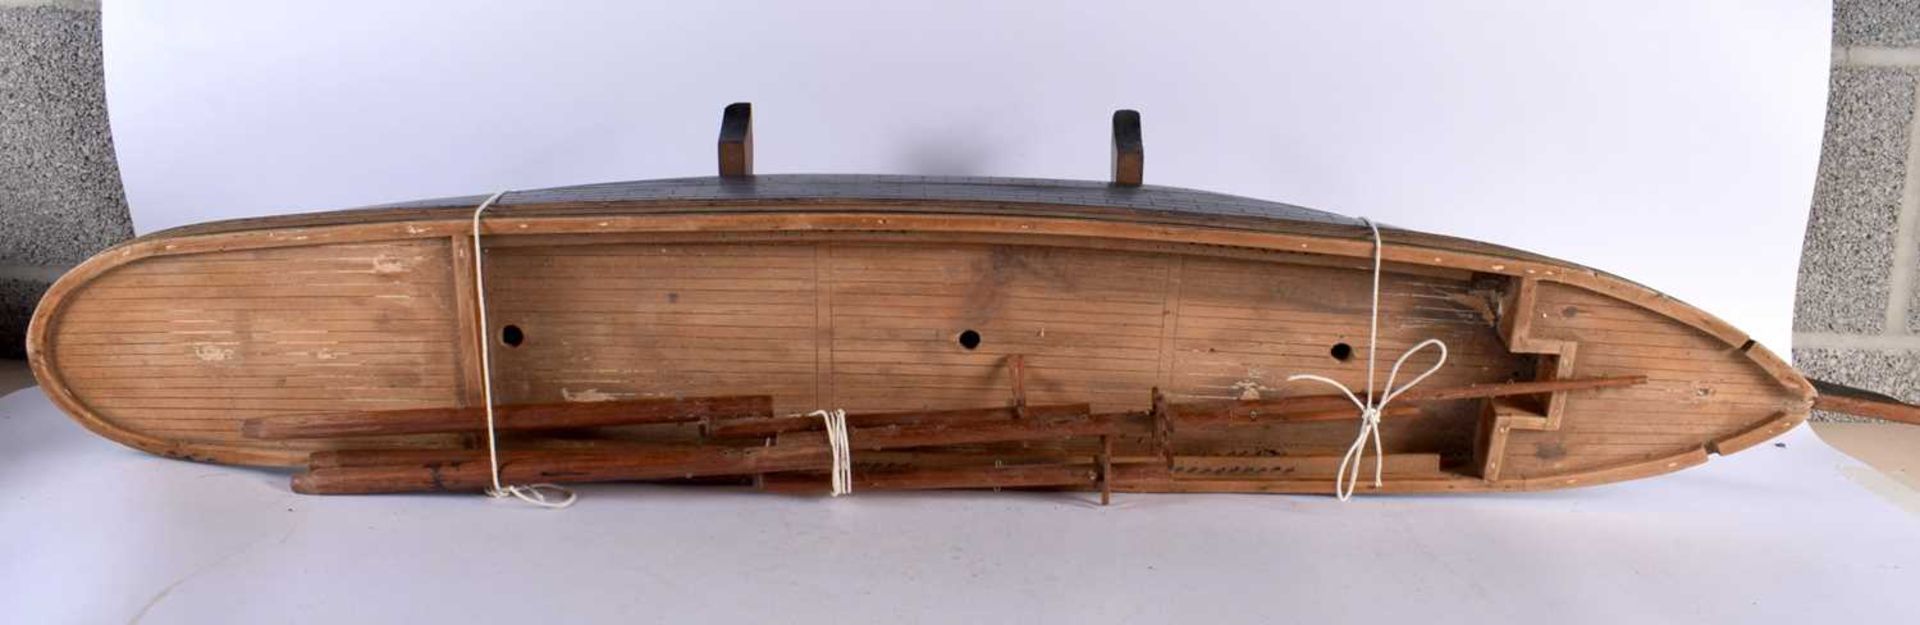 A SCRATCH BUILT MODEL OF A BOAT. 120 cm wide. - Image 2 of 4